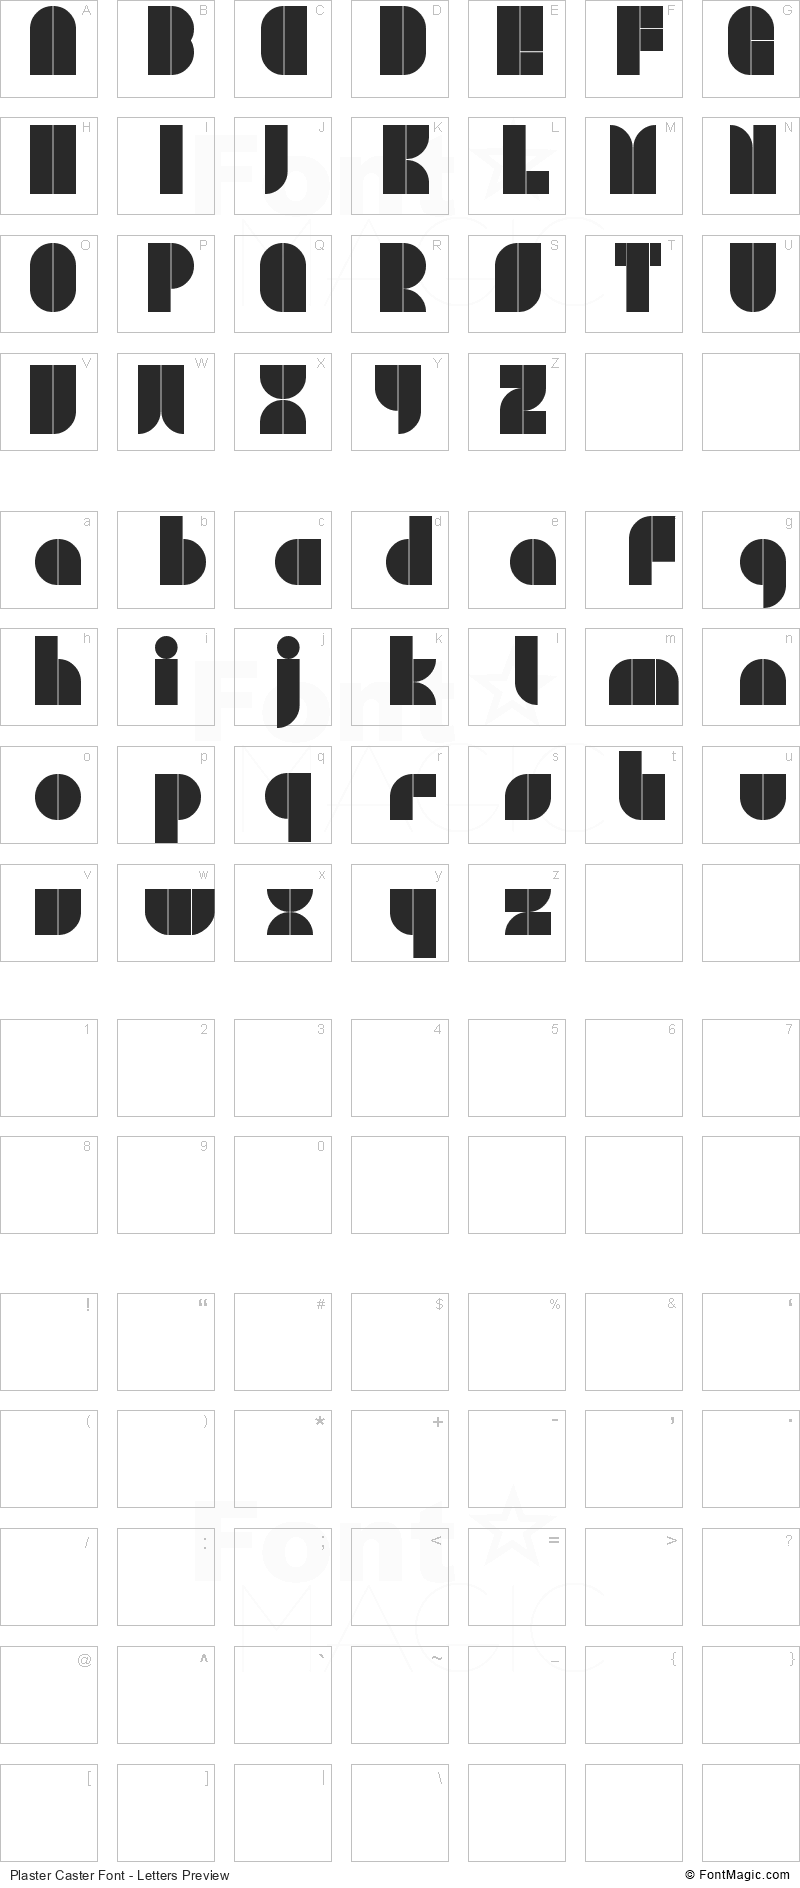 Plaster Caster Font - All Latters Preview Chart